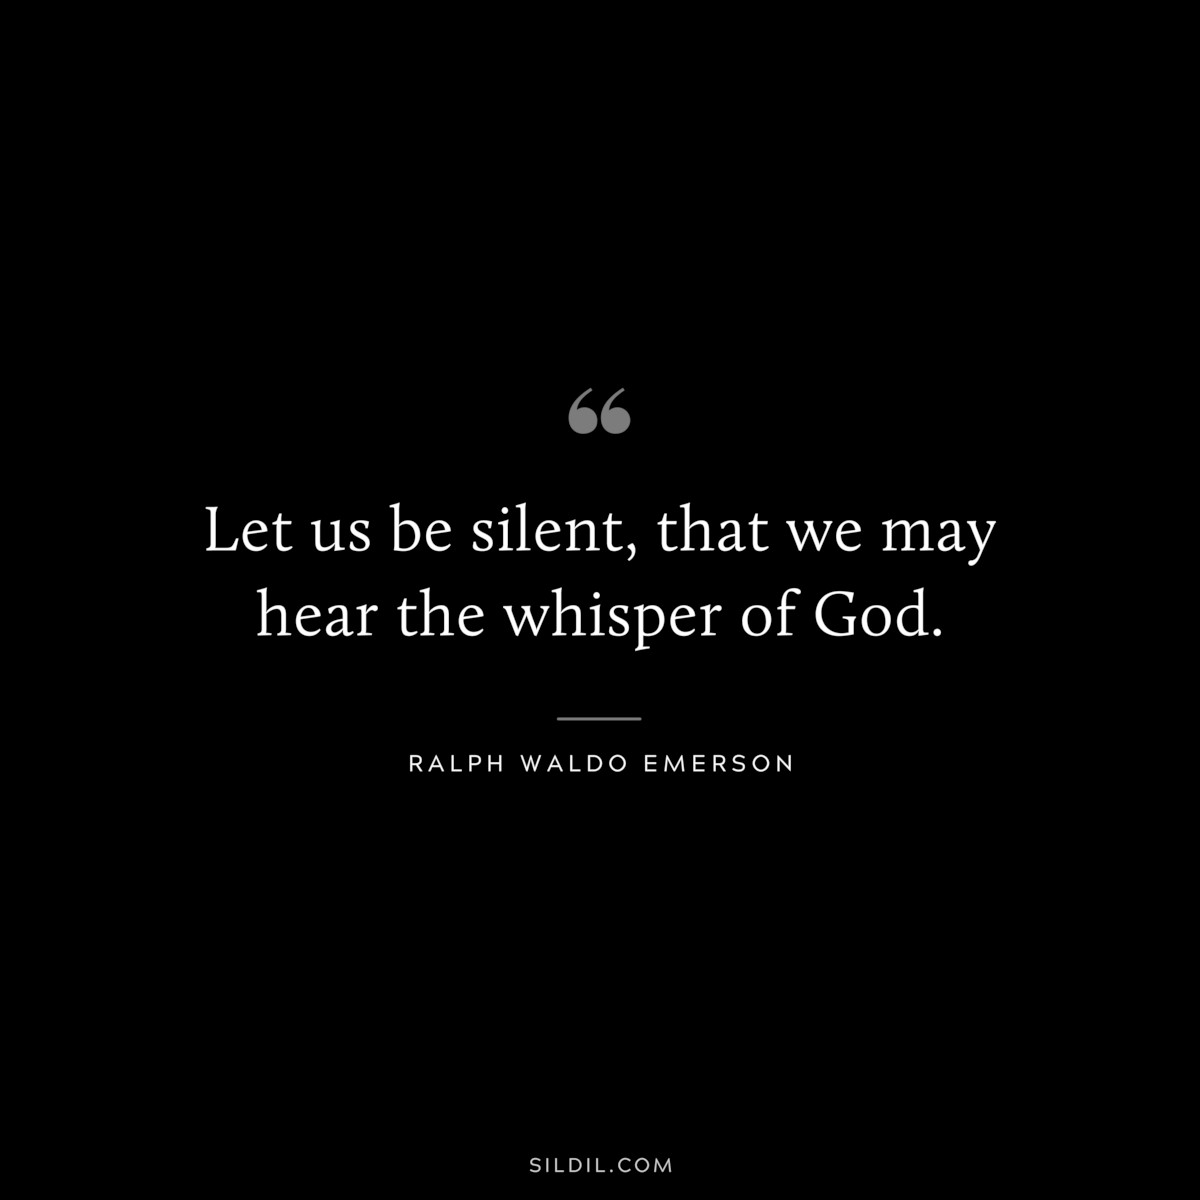 Let us be silent, that we may hear the whisper of God. — Ralph Waldo Emerson